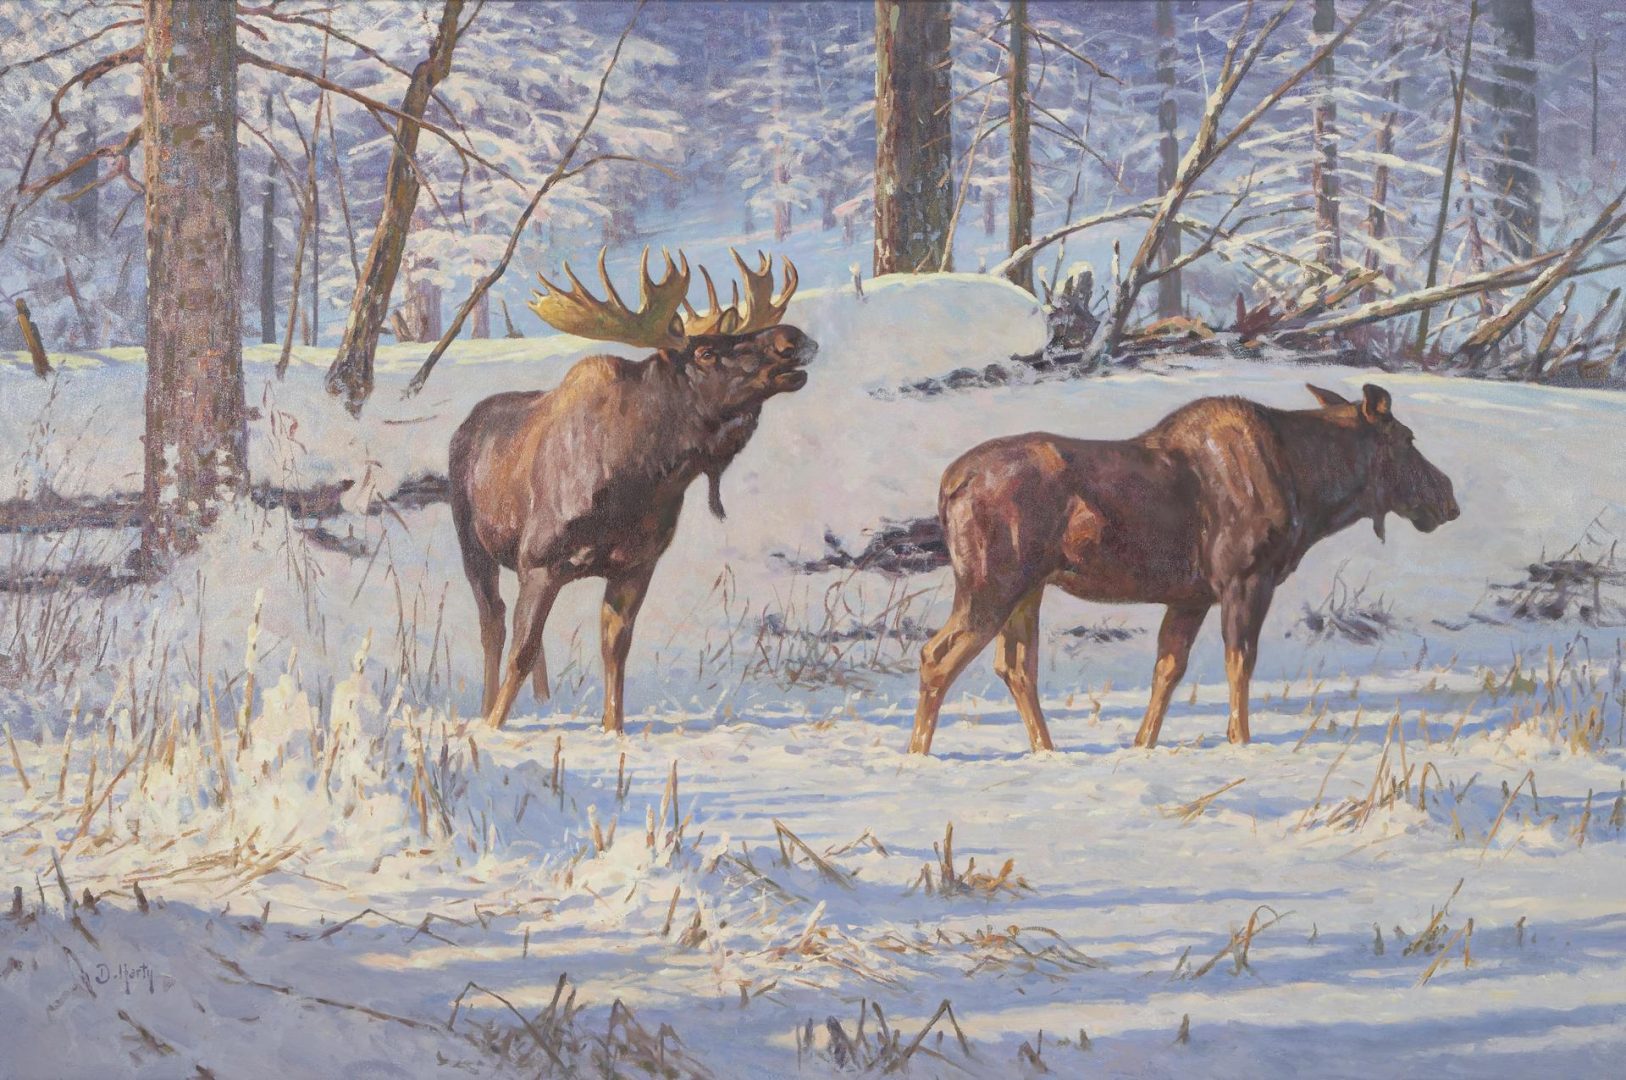 Lot 604: Large Dwayne Harty Oil on Canvas Wildlife Painting